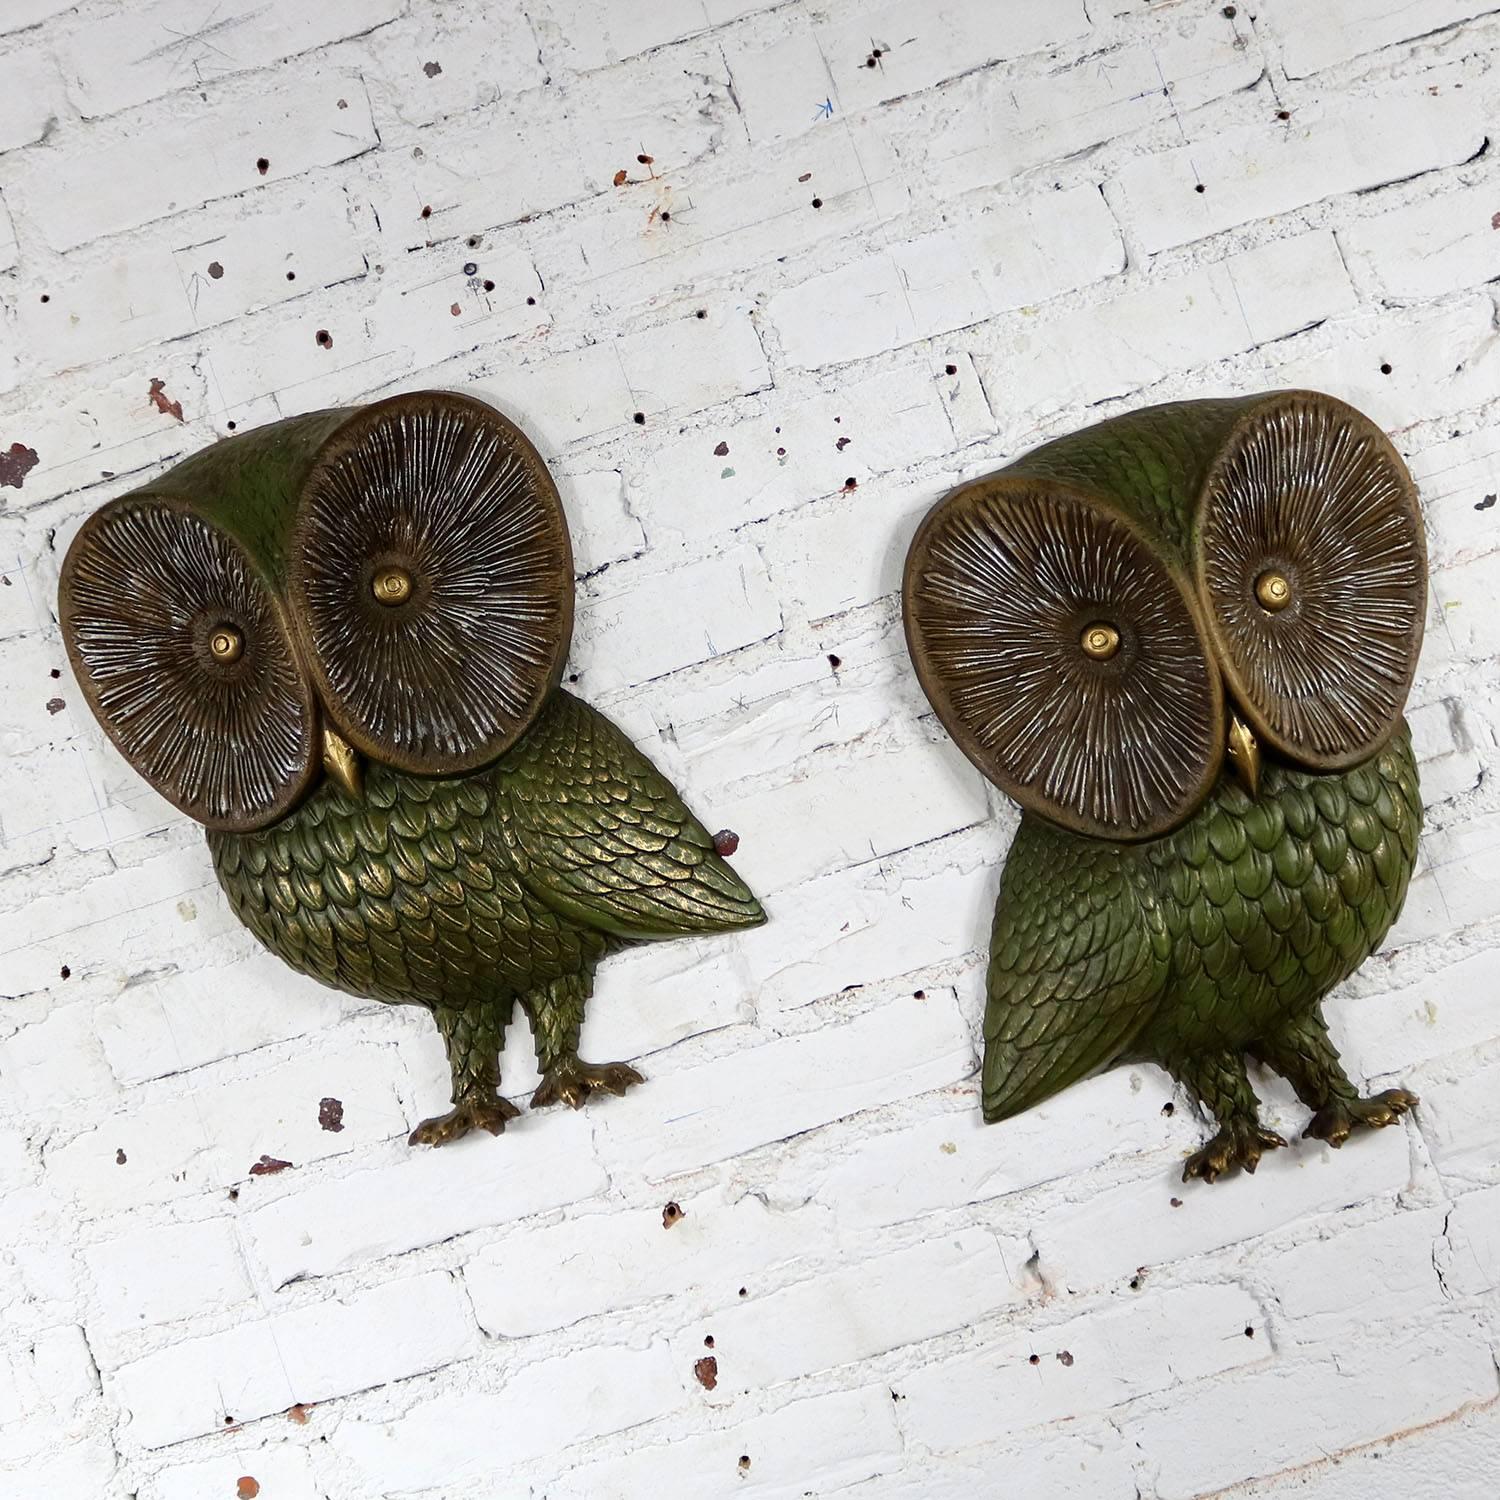 20th Century Owl Wall Hanging Sculpture Plaques by Burwood Product Co Mid-Century Modern Pair